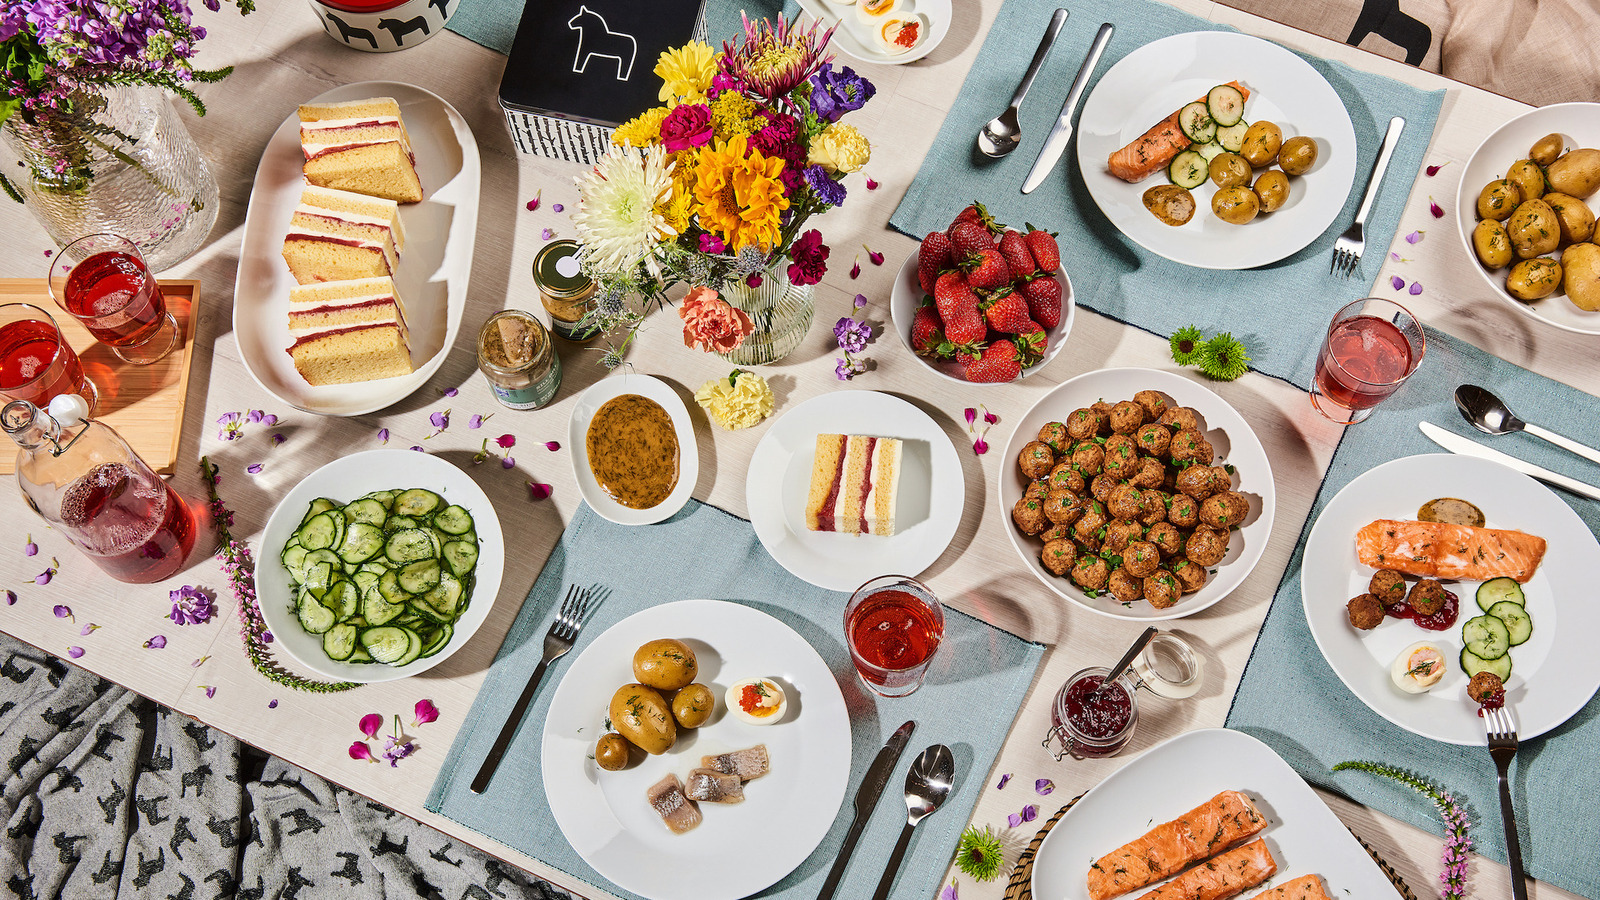 Ikea’s Midsummer Buffet Will Return Just In Time For Solstice Season – The Daily Meal